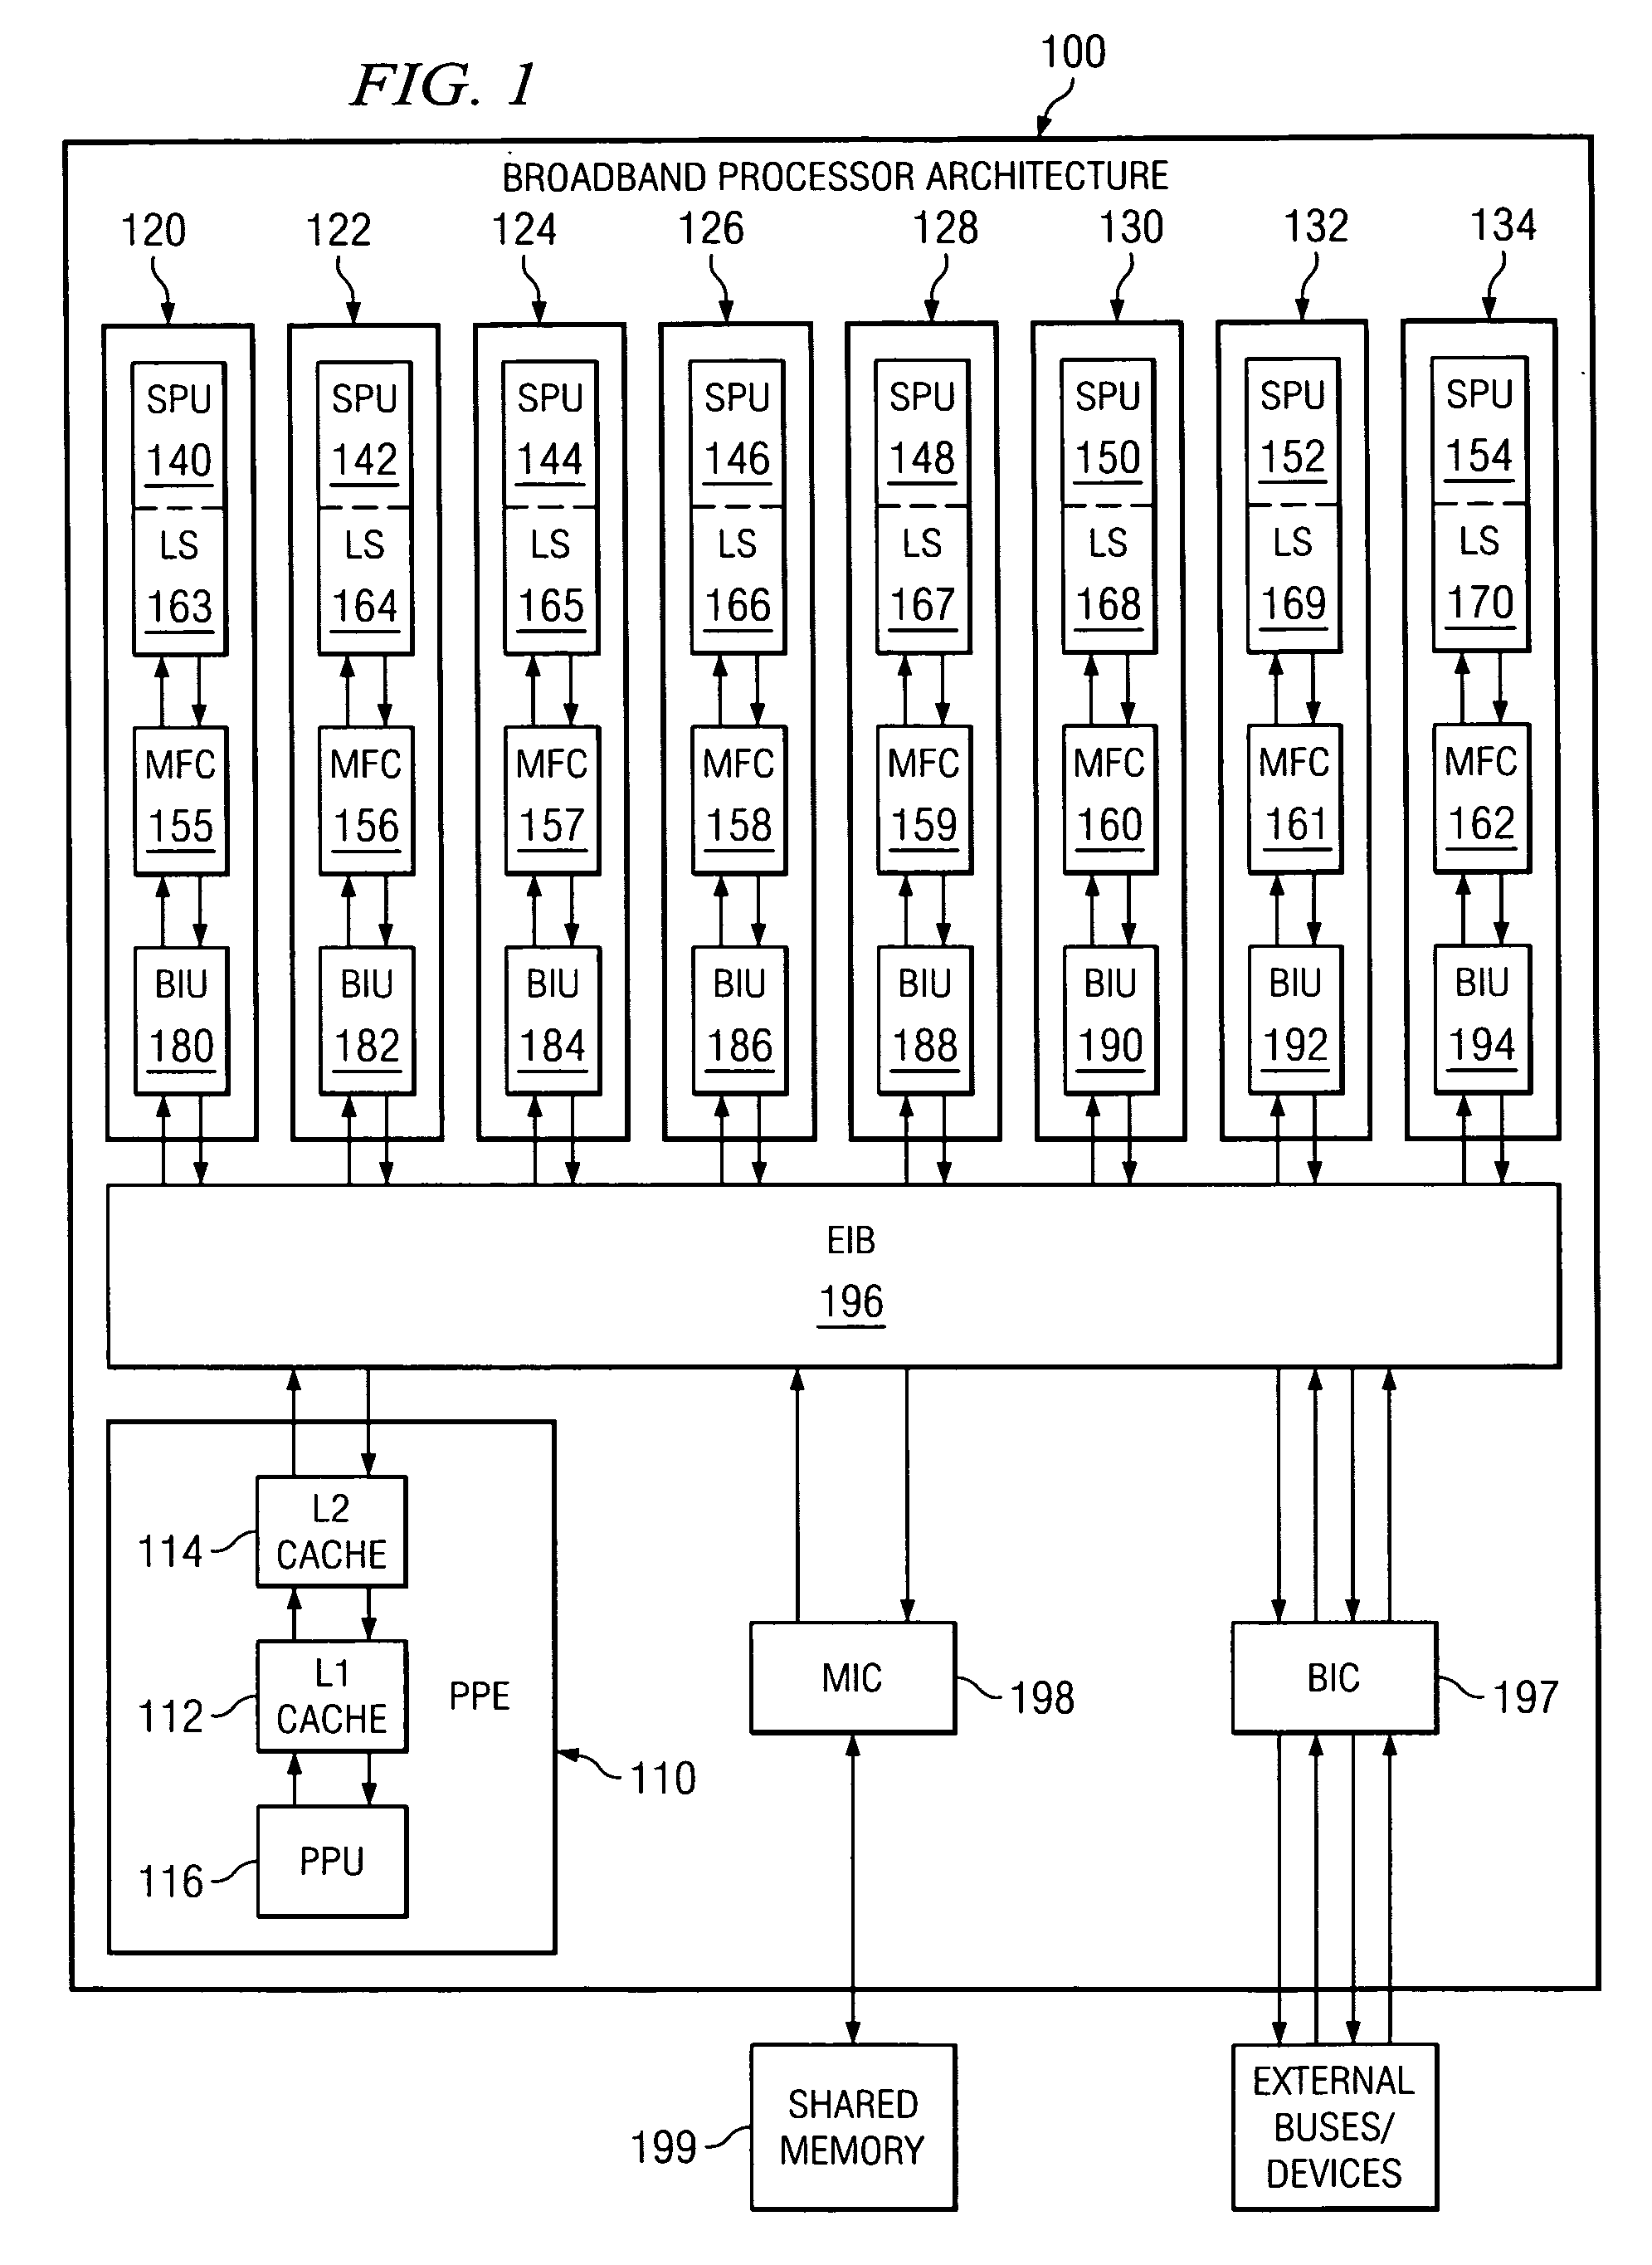 Apparatus and method for handling data cache misses out-of-order for asynchronous pipelines